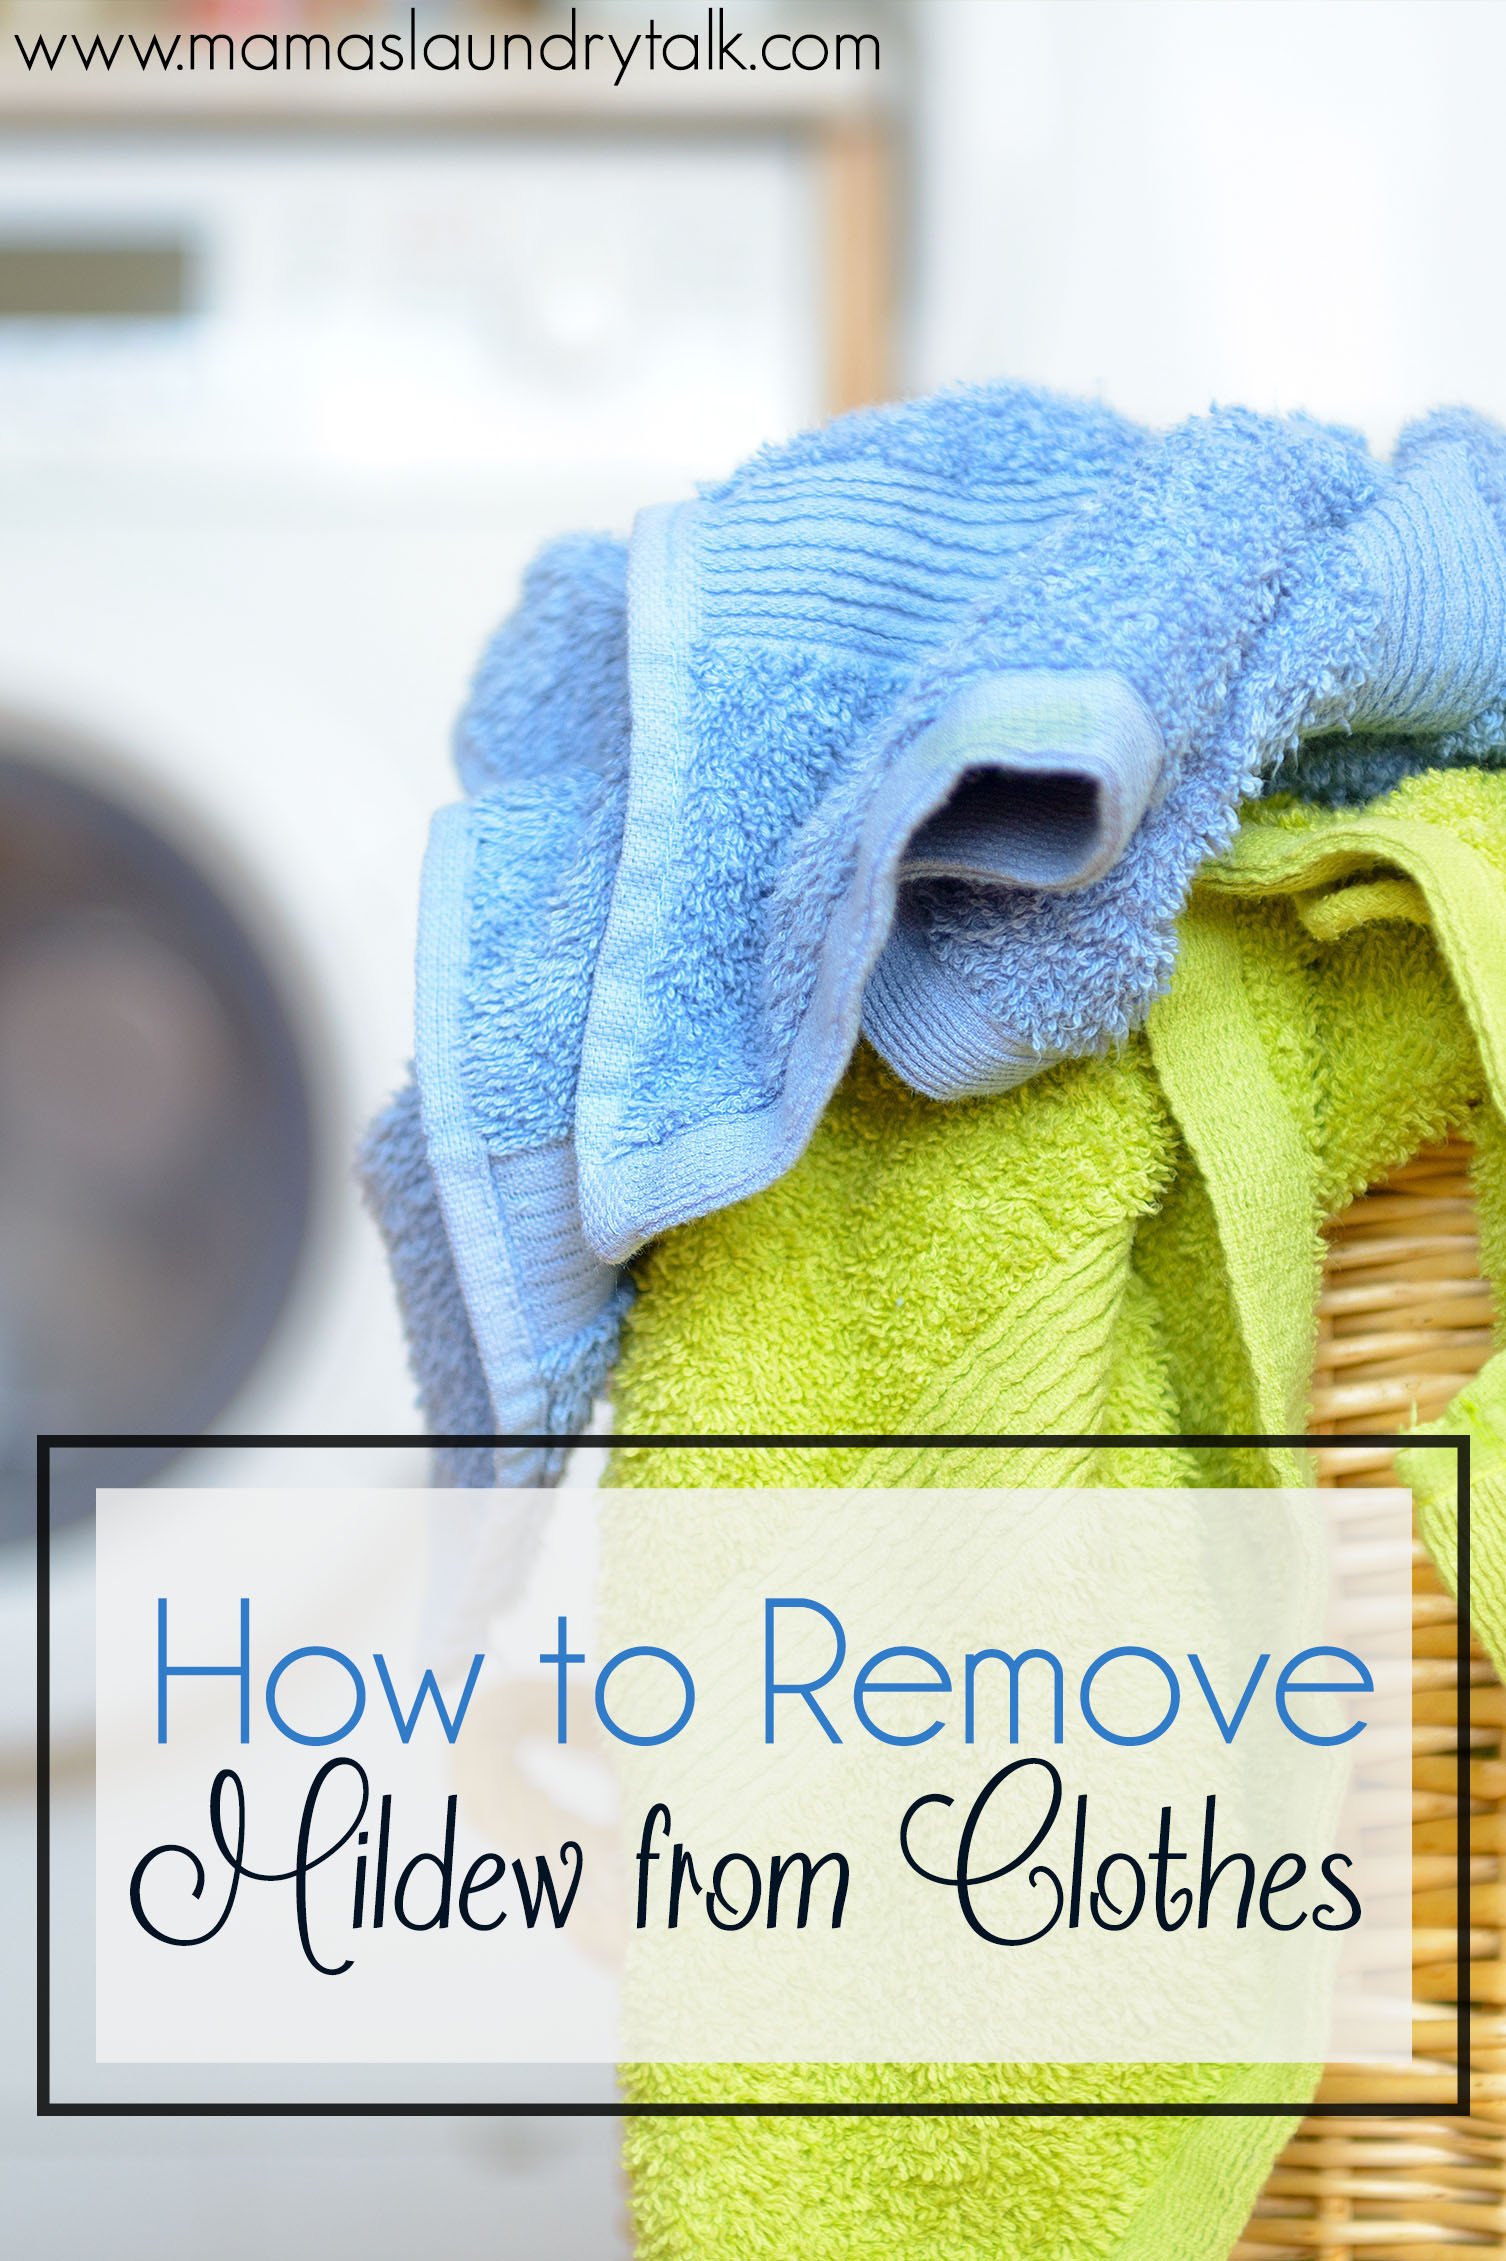 How to Remove Mildew from Clothes